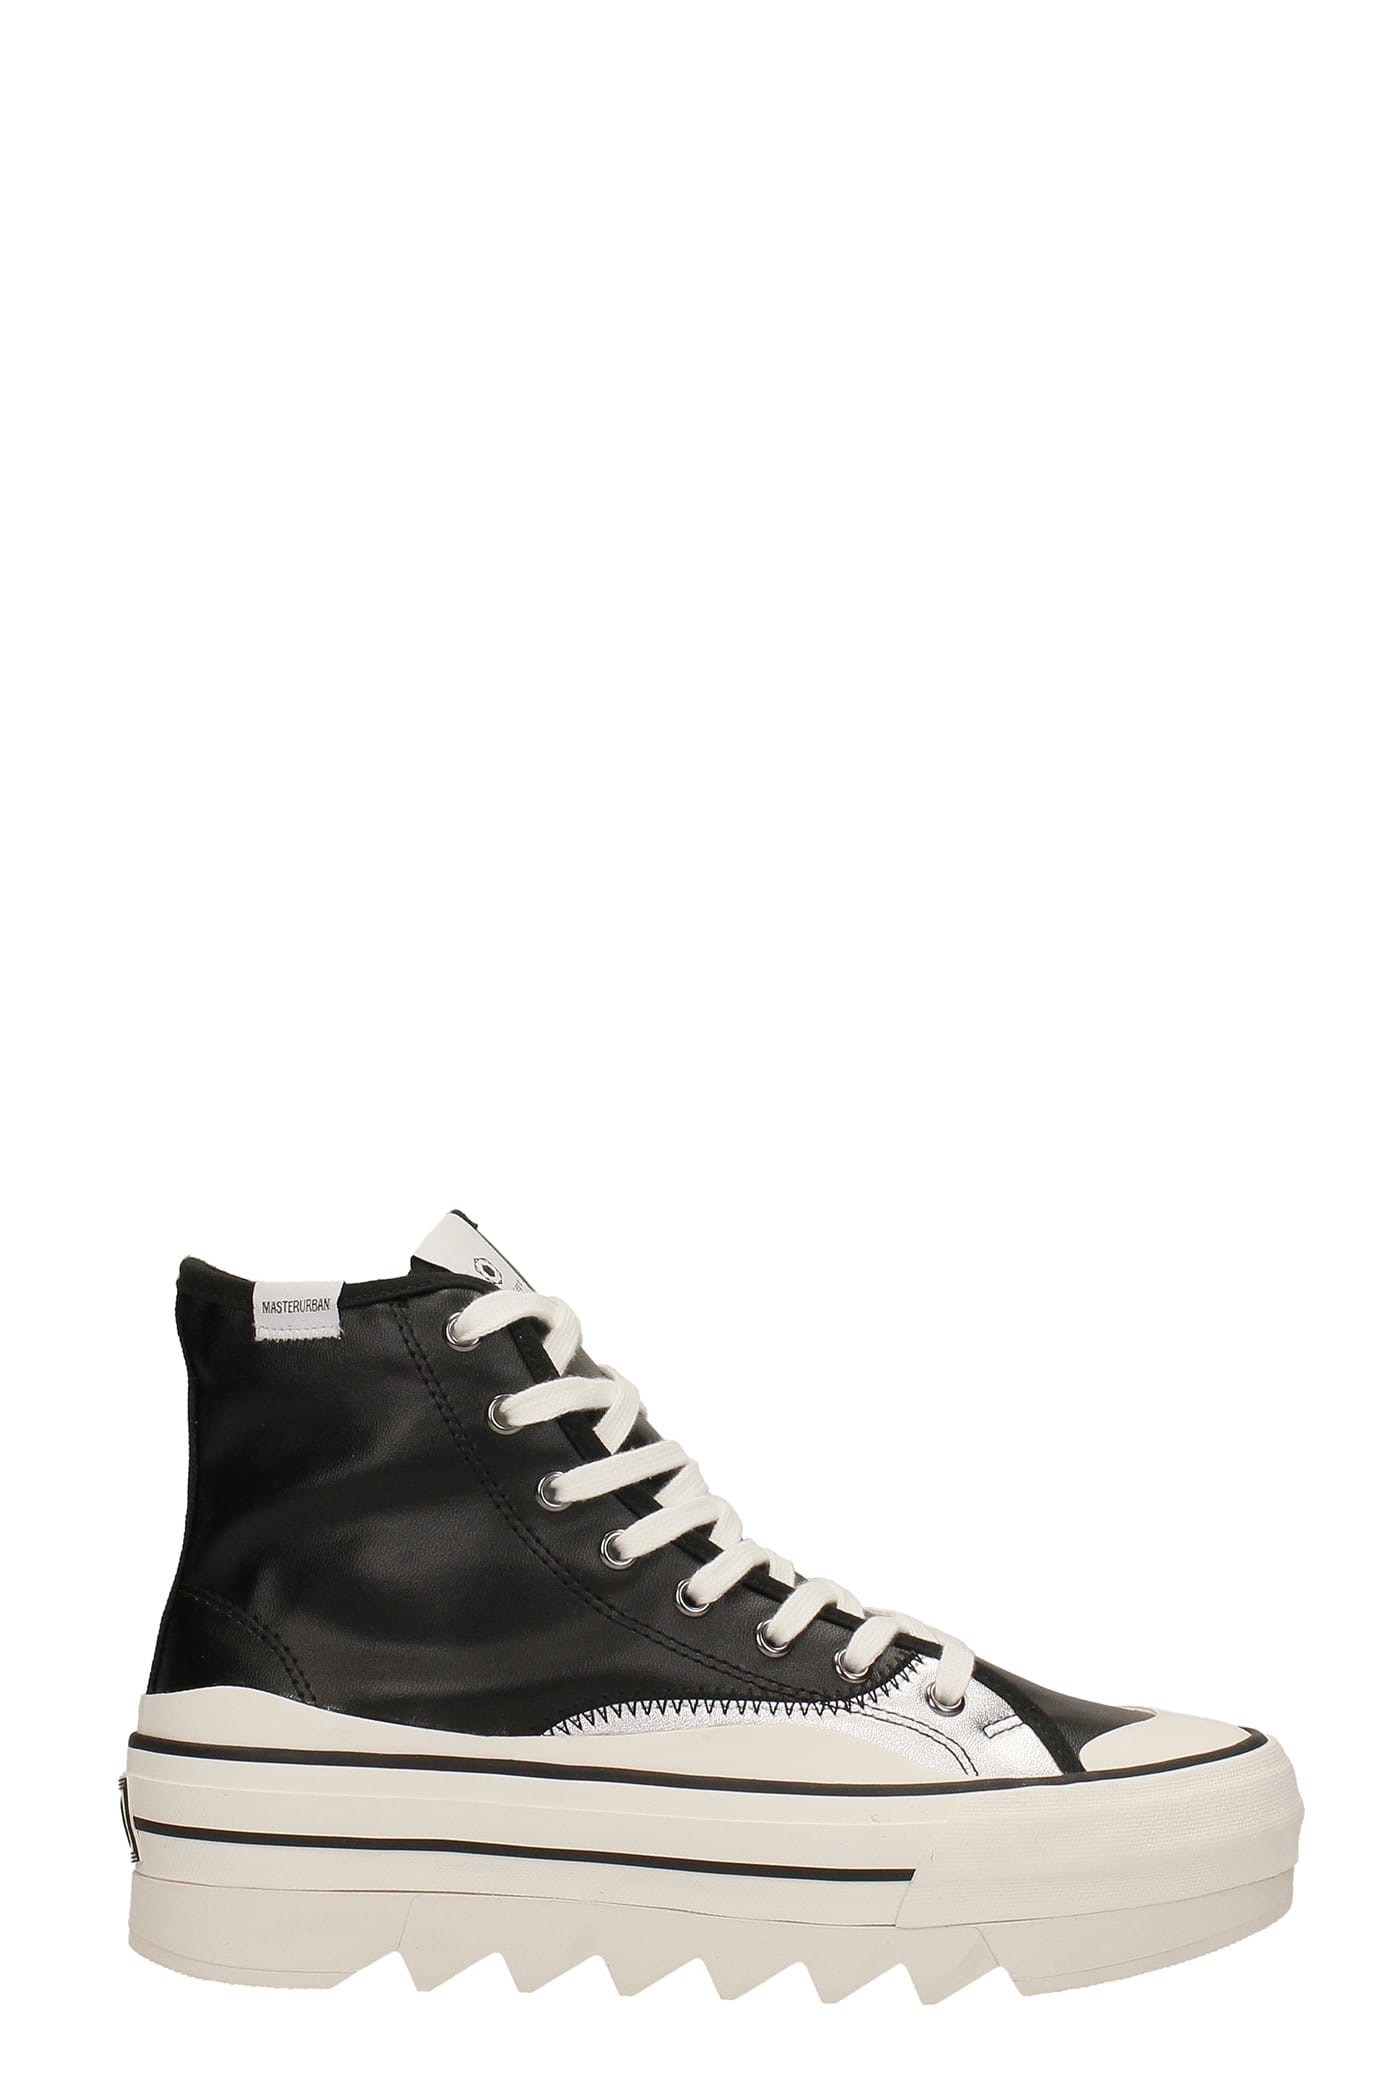 M.O.A. master of arts Sneakers In Black Leather